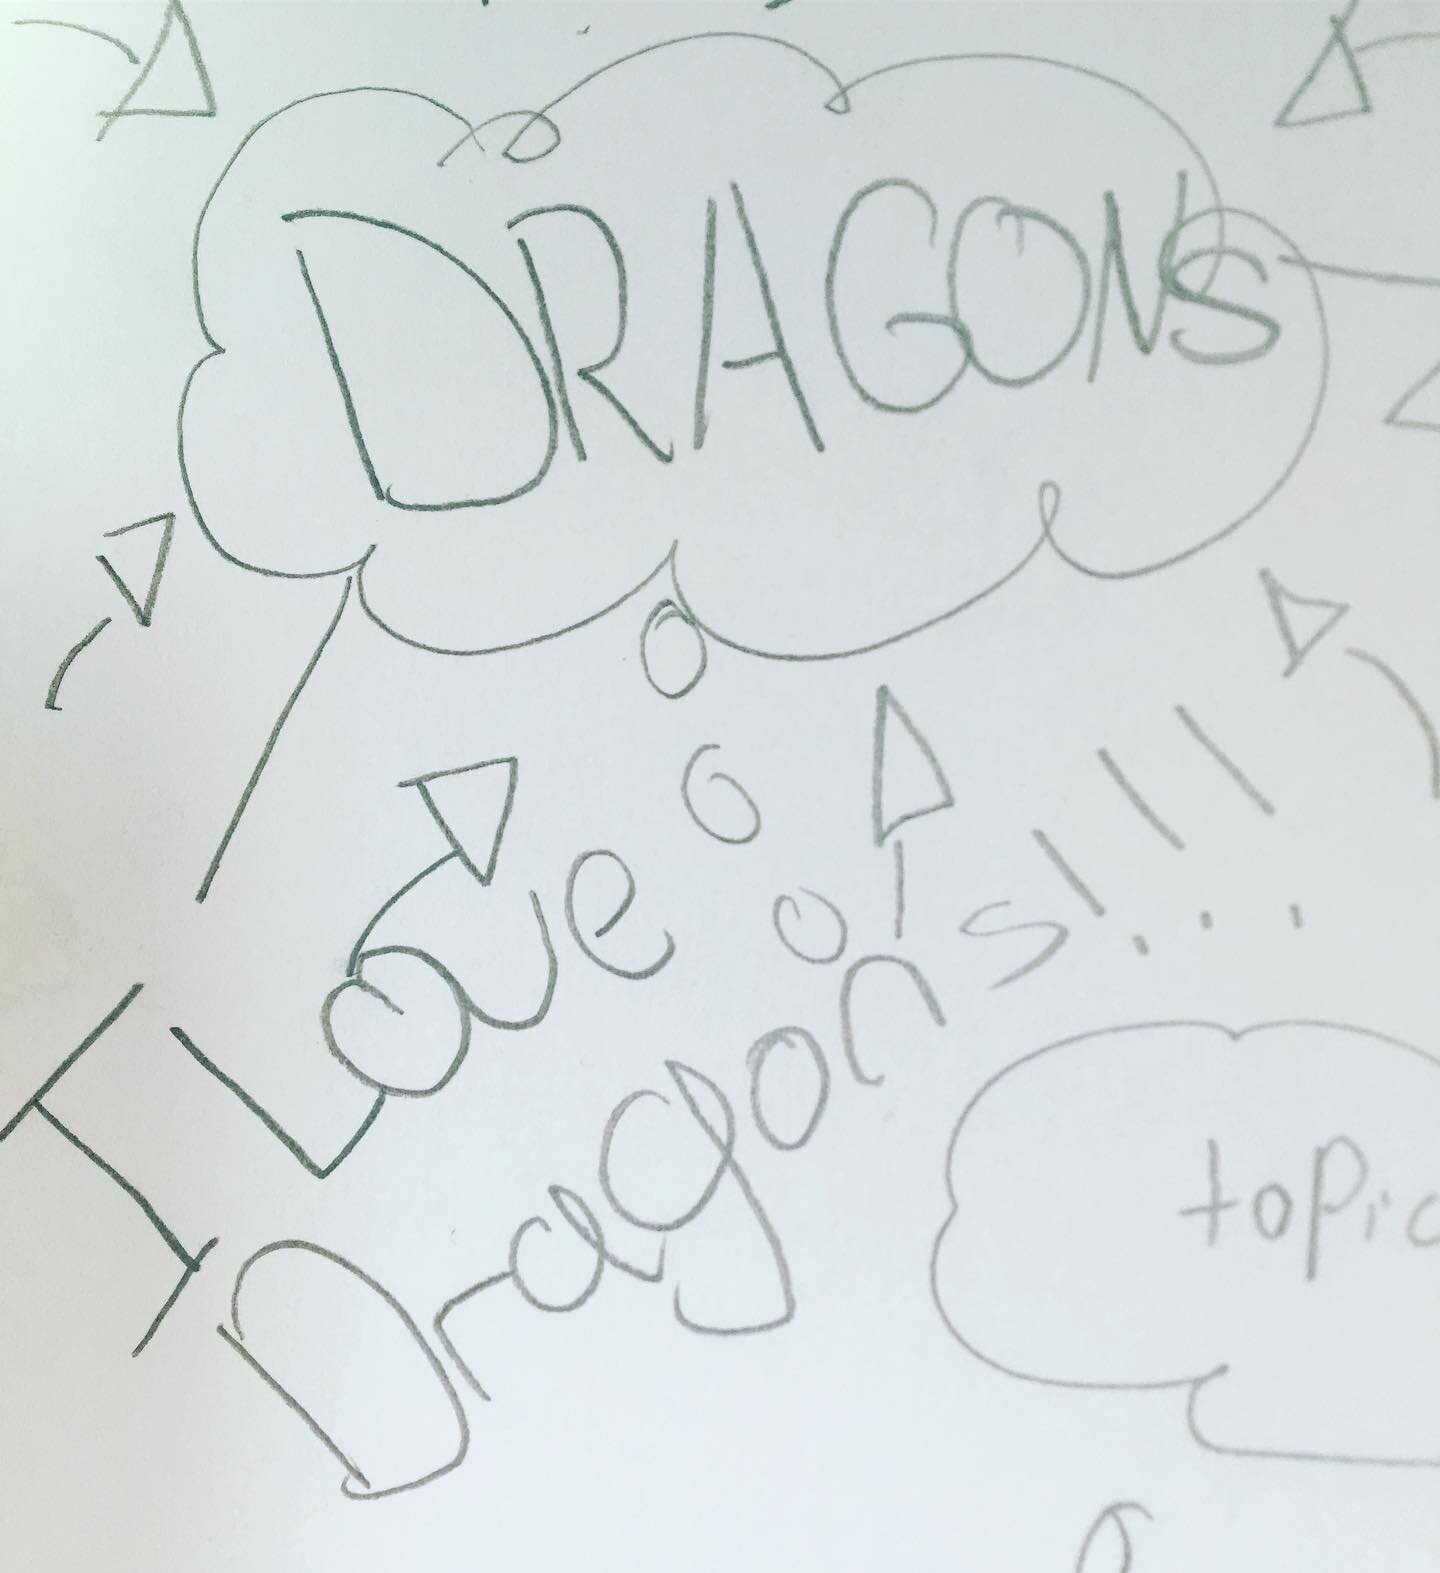 Teach what you know - this student knows about dragons - and ❤️&rsquo;s them #ideasintomotion #makingmeaning #tellingstories #memoryvesselstudio #artresidency #artist #stopmotion #animation #create #soccer #friends #handmade #art #stop-motion  #drago